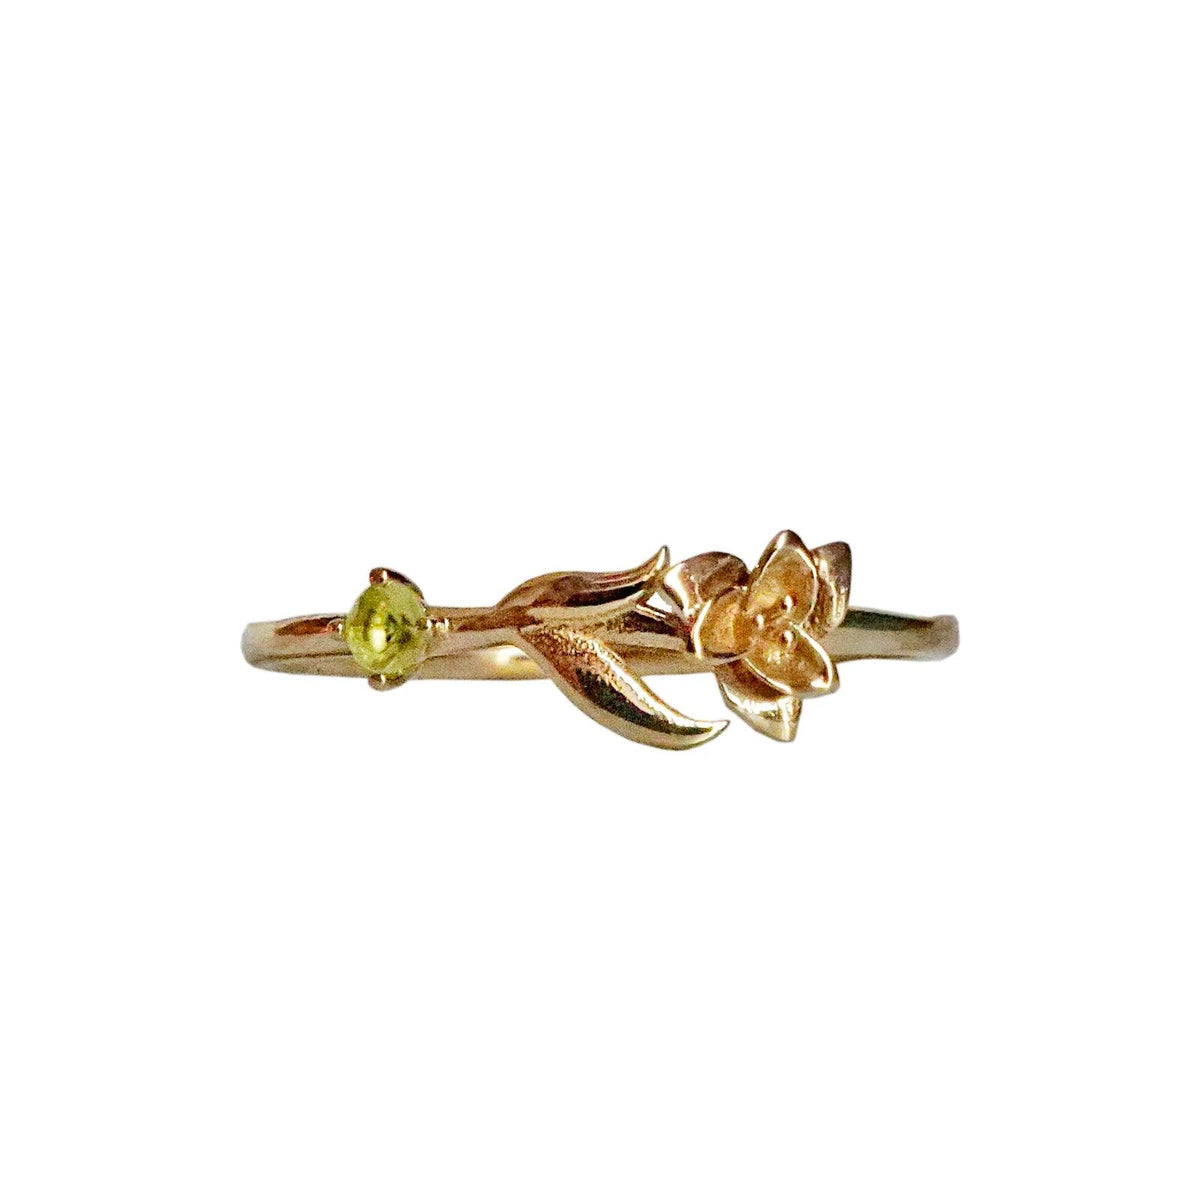 August Birth Flower Ring in yellow gold